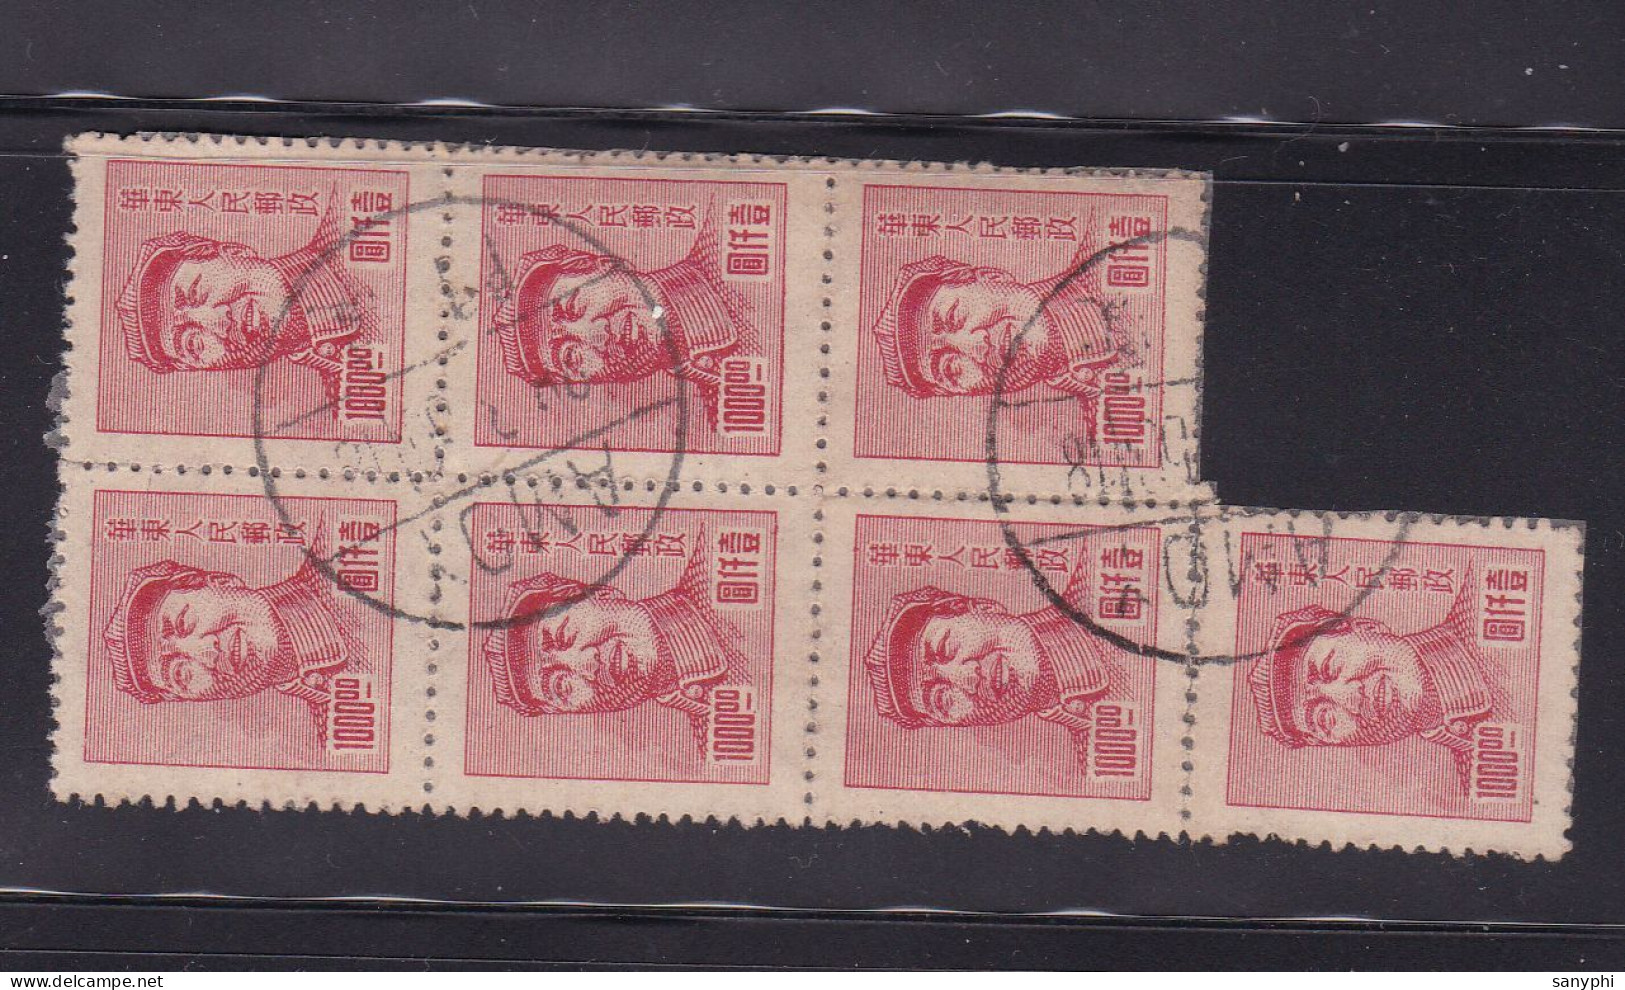 East China 1949 Mao 1000Yuan BLK7 Cxl By Amoy - Unused Stamps